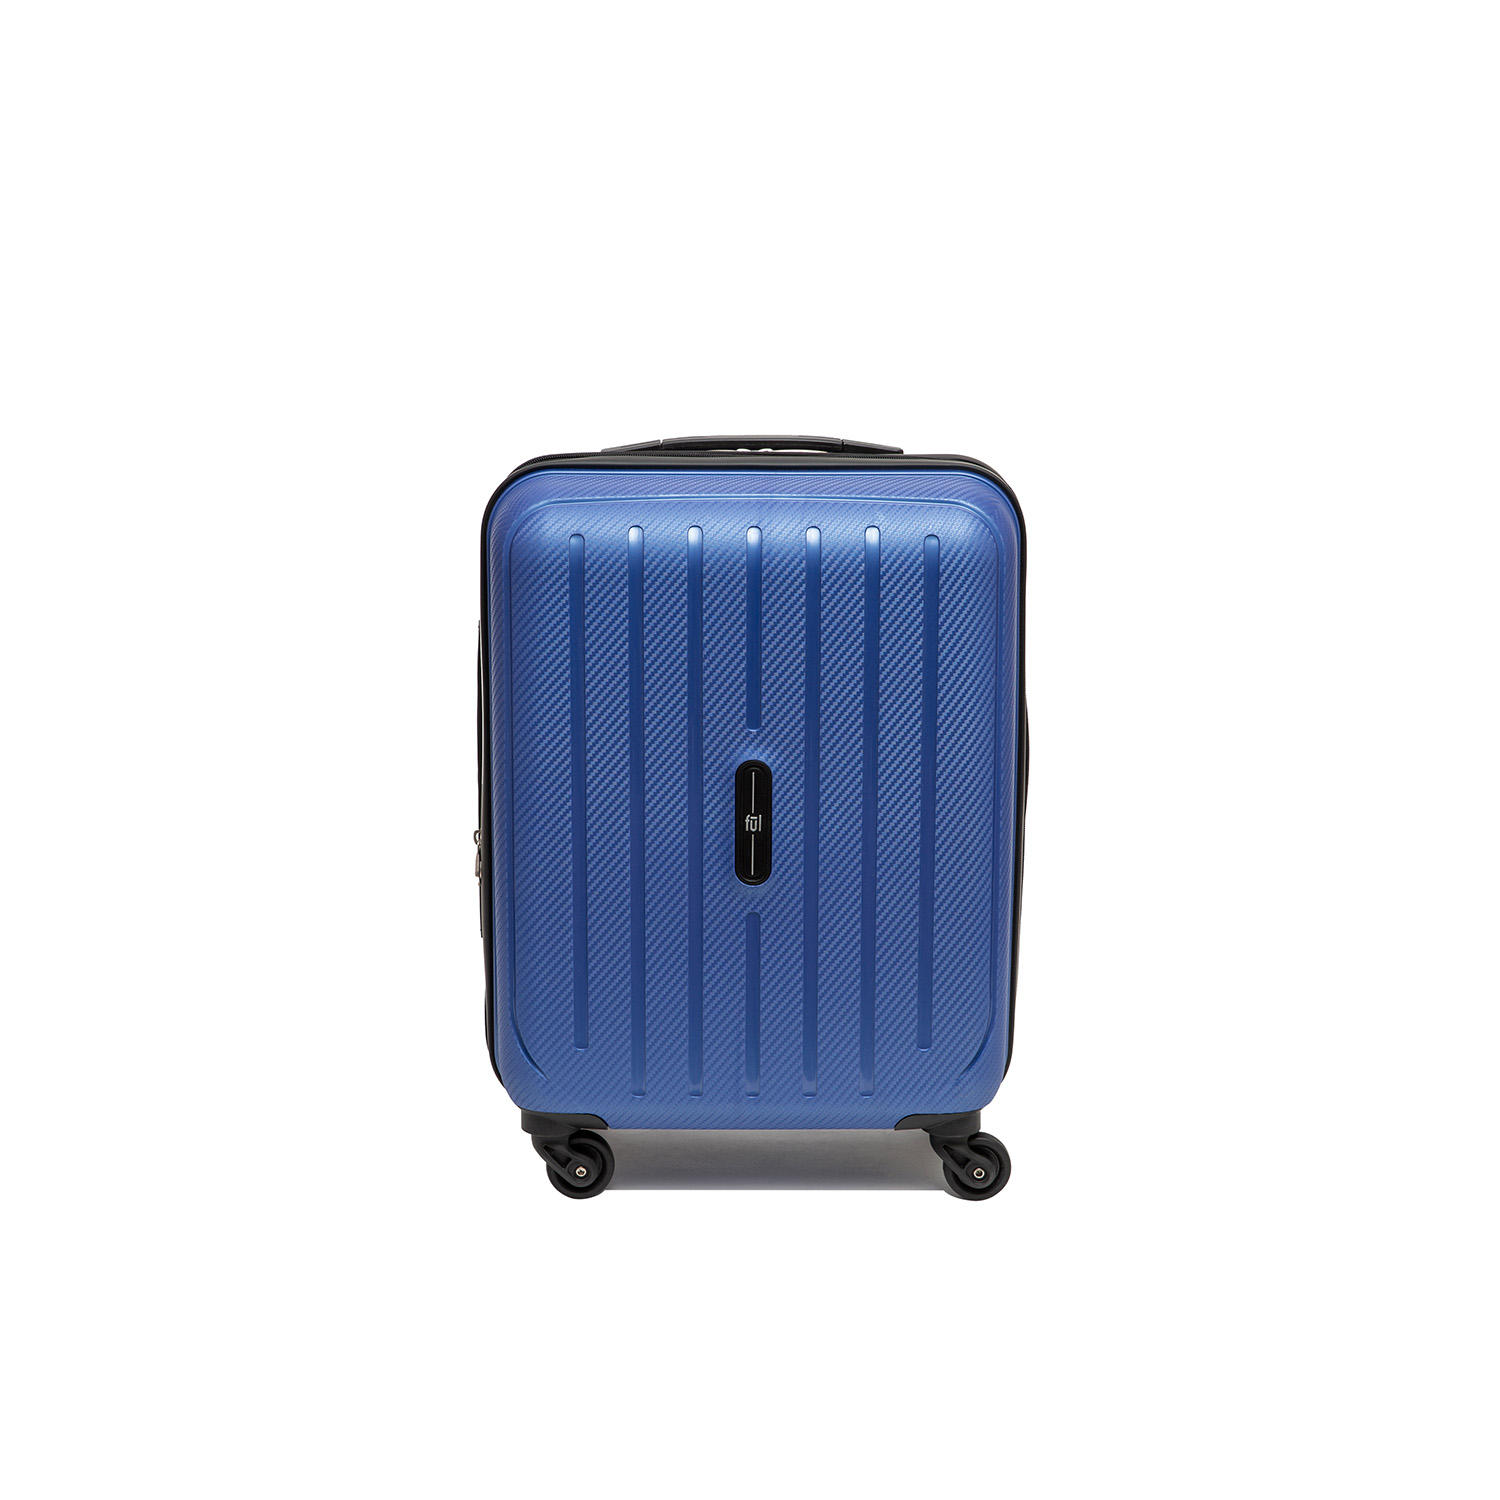 FUL Pure 21″ Carry-On Rolling Suitcase with Built-in USB Port